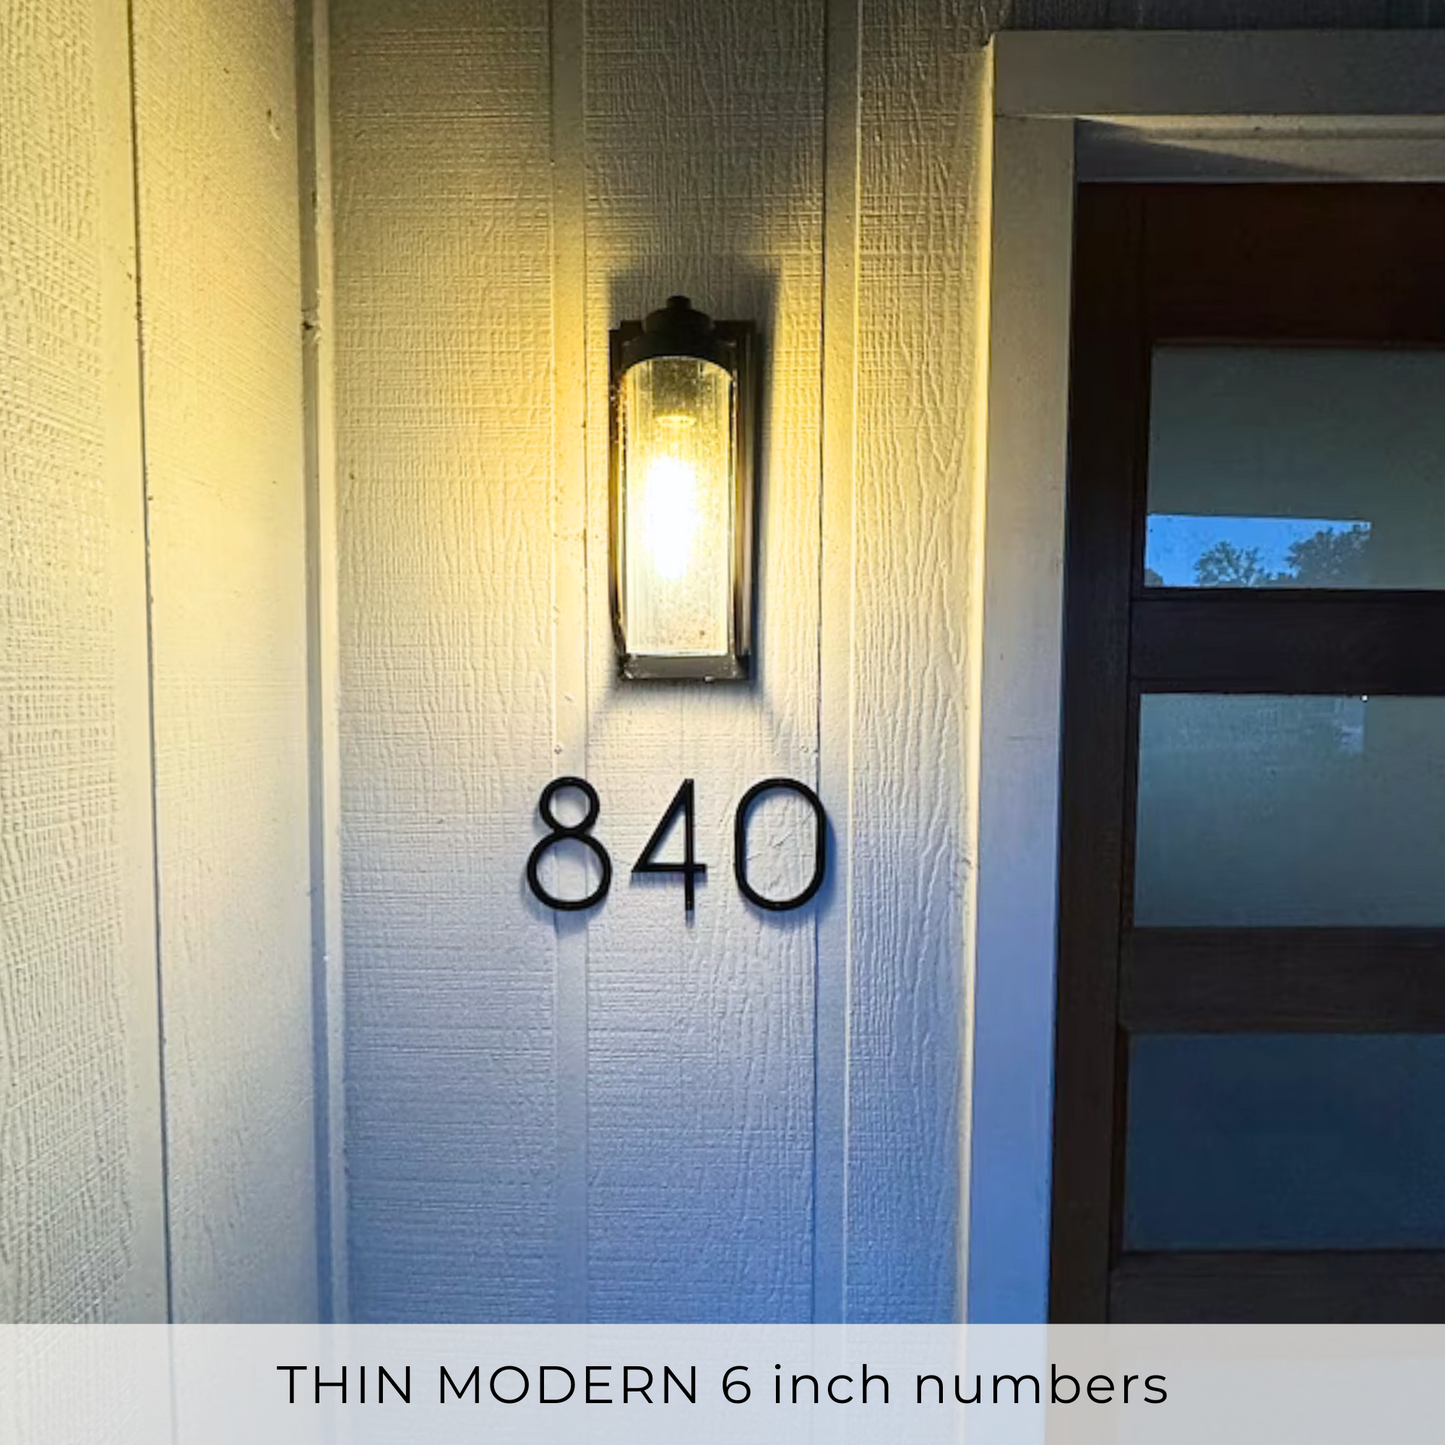 6 inch THIN MODERN house numbers and letters